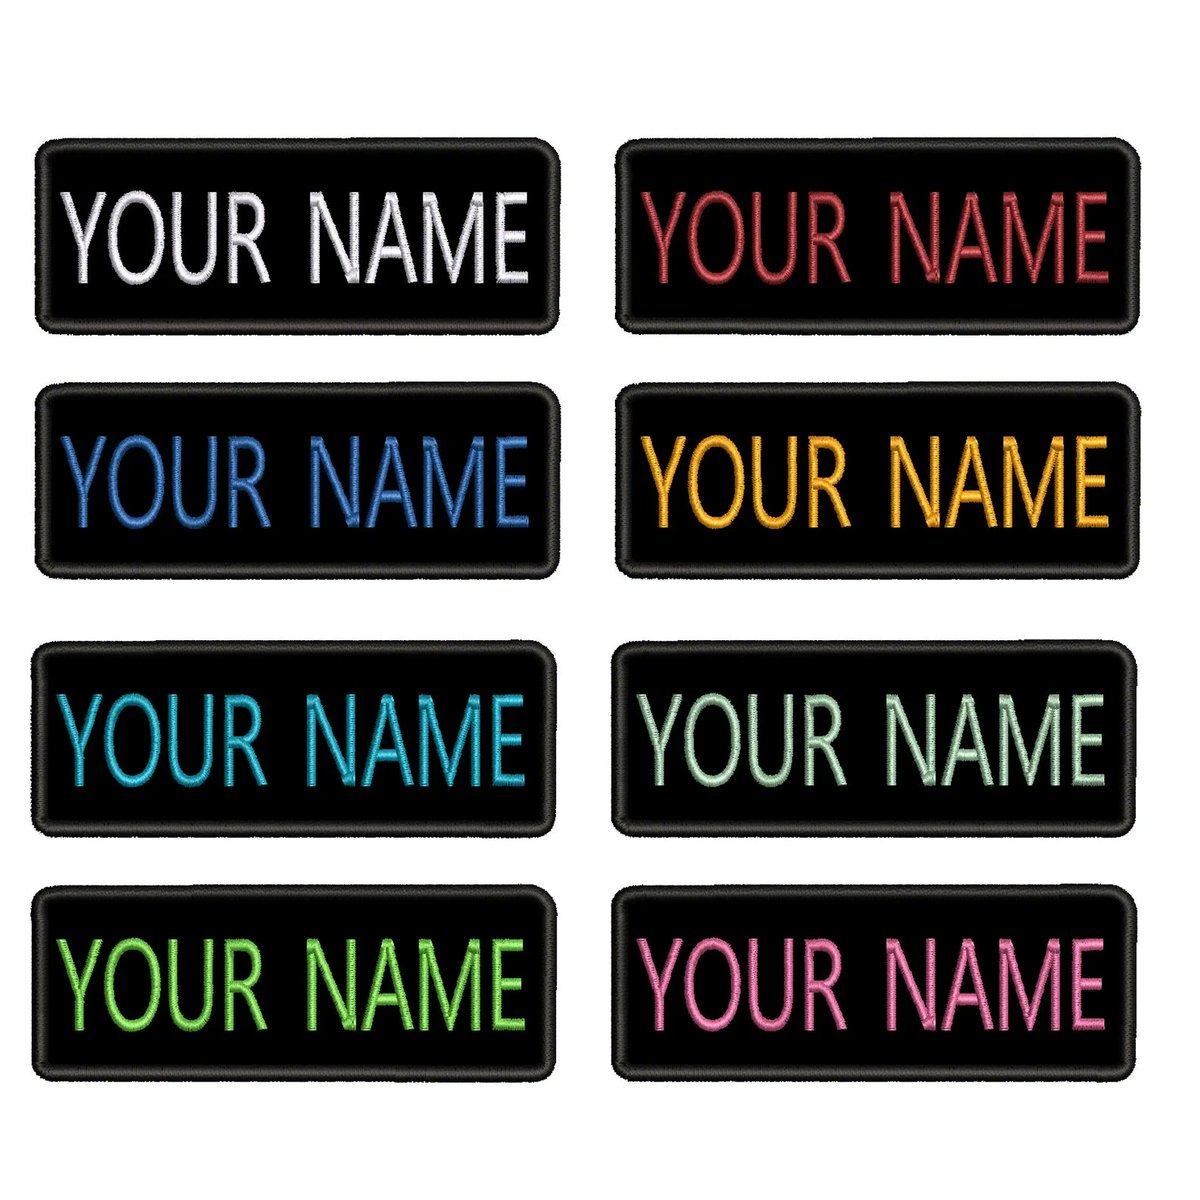 Custom embroidered name patches for only R70. These are adhesive patches, simply iron onto a jacket, shirt, cap, bag, etc.
craftyembroideries.co.za/Custom-Embroid…
#Patches #WomensArt #Stitchedart